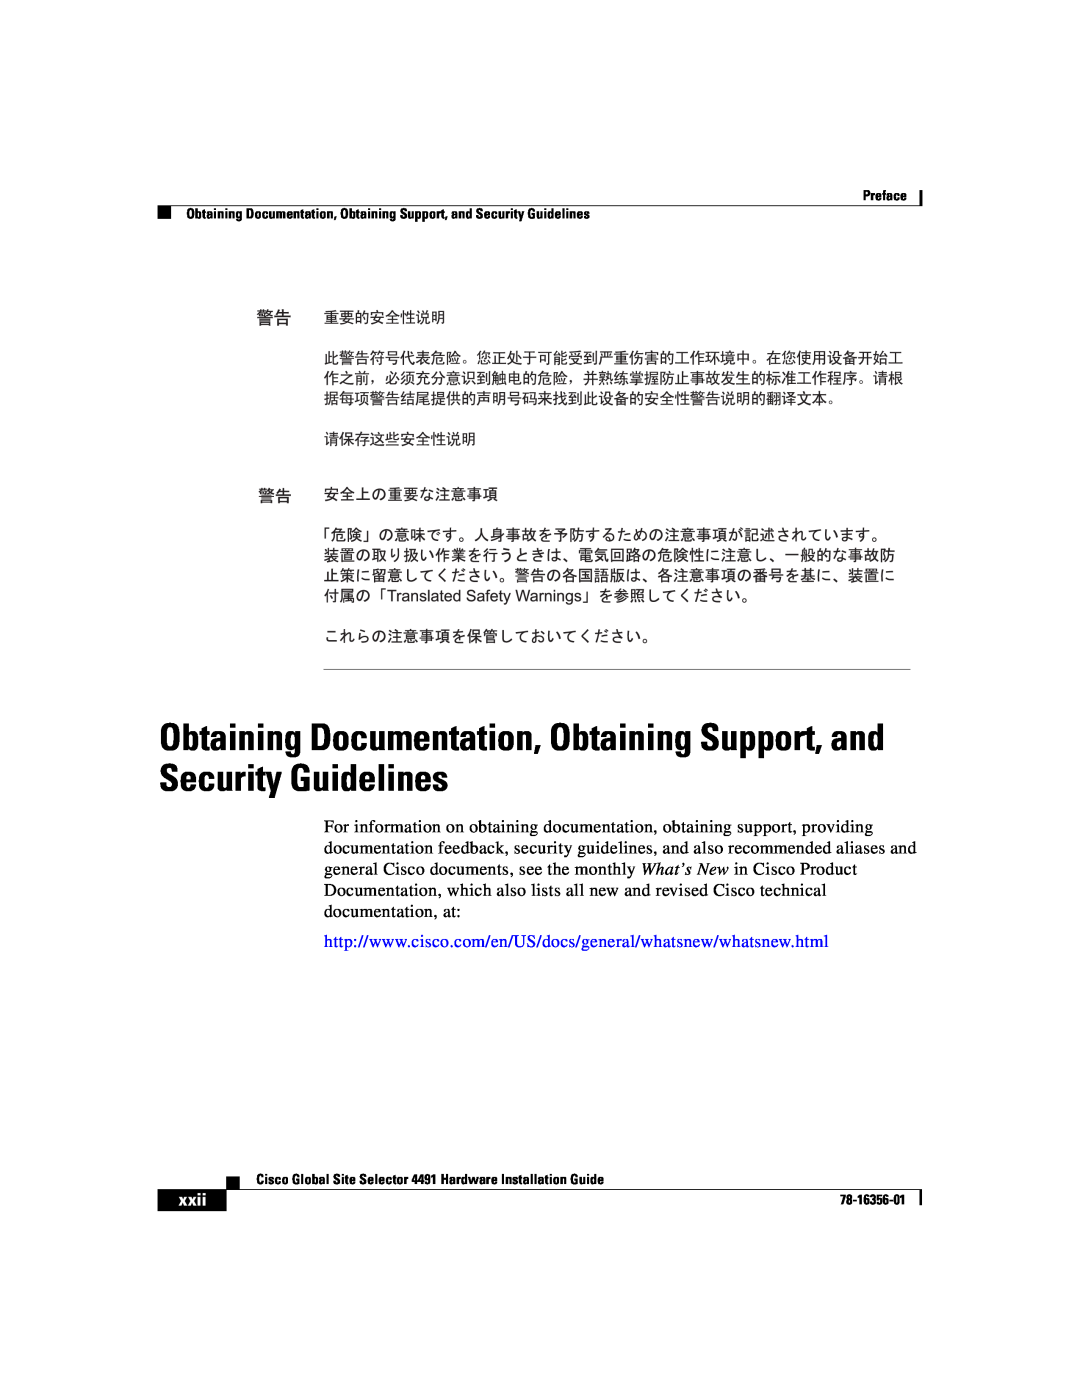 Cisco Systems 78-16356-01 manual Obtaining Documentation, Obtaining Support, and Security Guidelines, xxii 